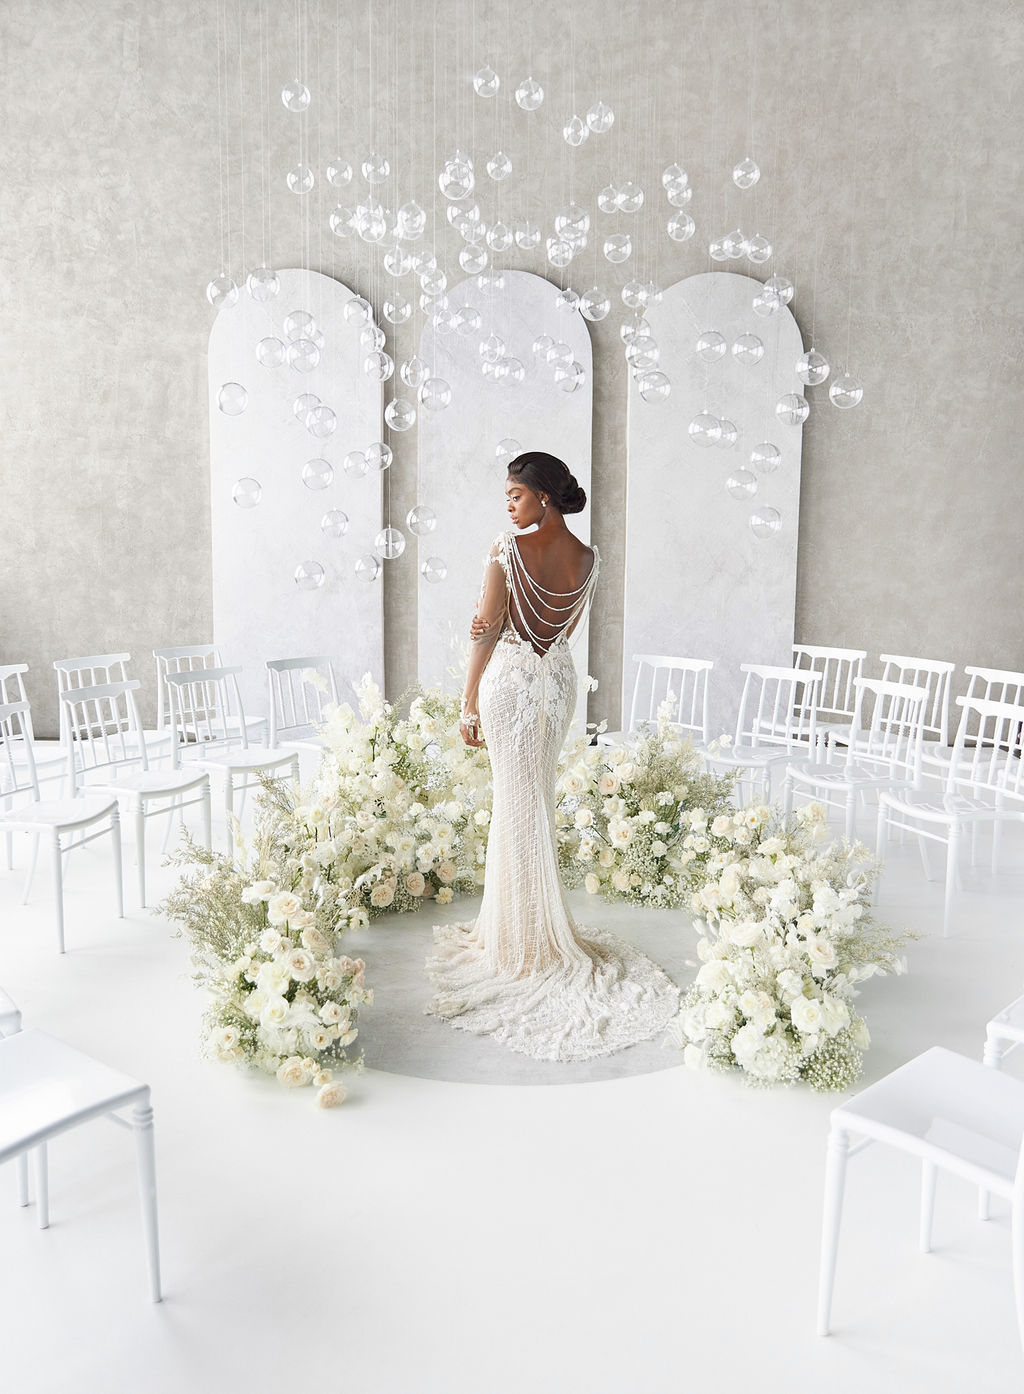 Bride posing in a wedding gown in the centre of the wedding ceremony setup surrounded by white flowers and chairs in a loft space